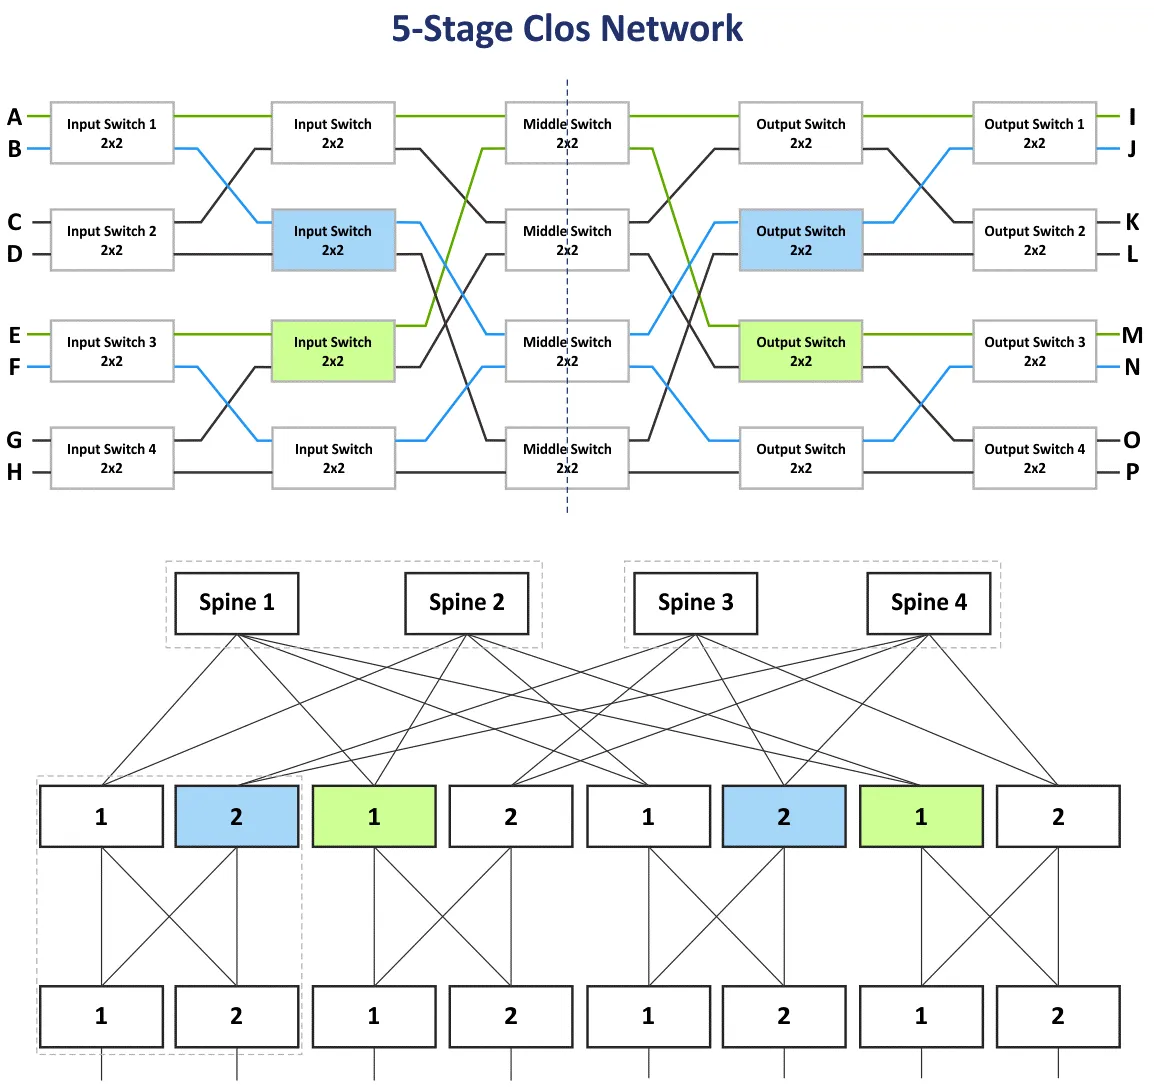 Five-Stage Clos Network Topology